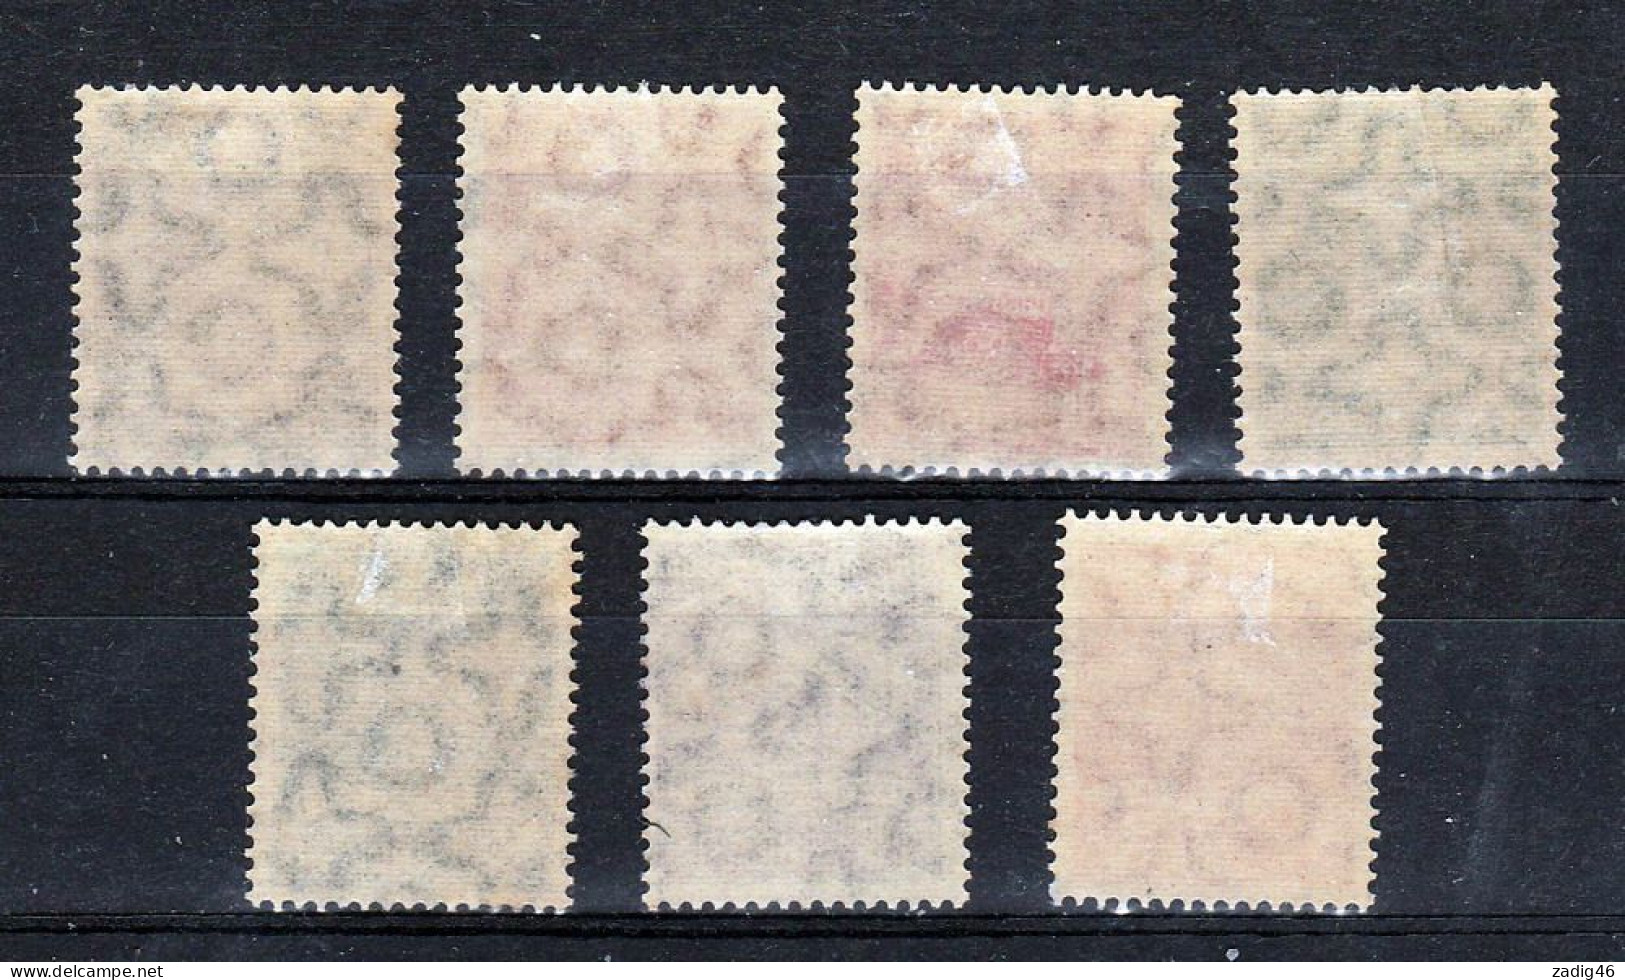 BRESIL - COMPAGNIE CONDOR - TIMBRES N° 1 A 7 - NEUFS AVEC INFIMES TRACES DE CHARNIERES A PEINE VISIBLES - Airmail (Private Companies)